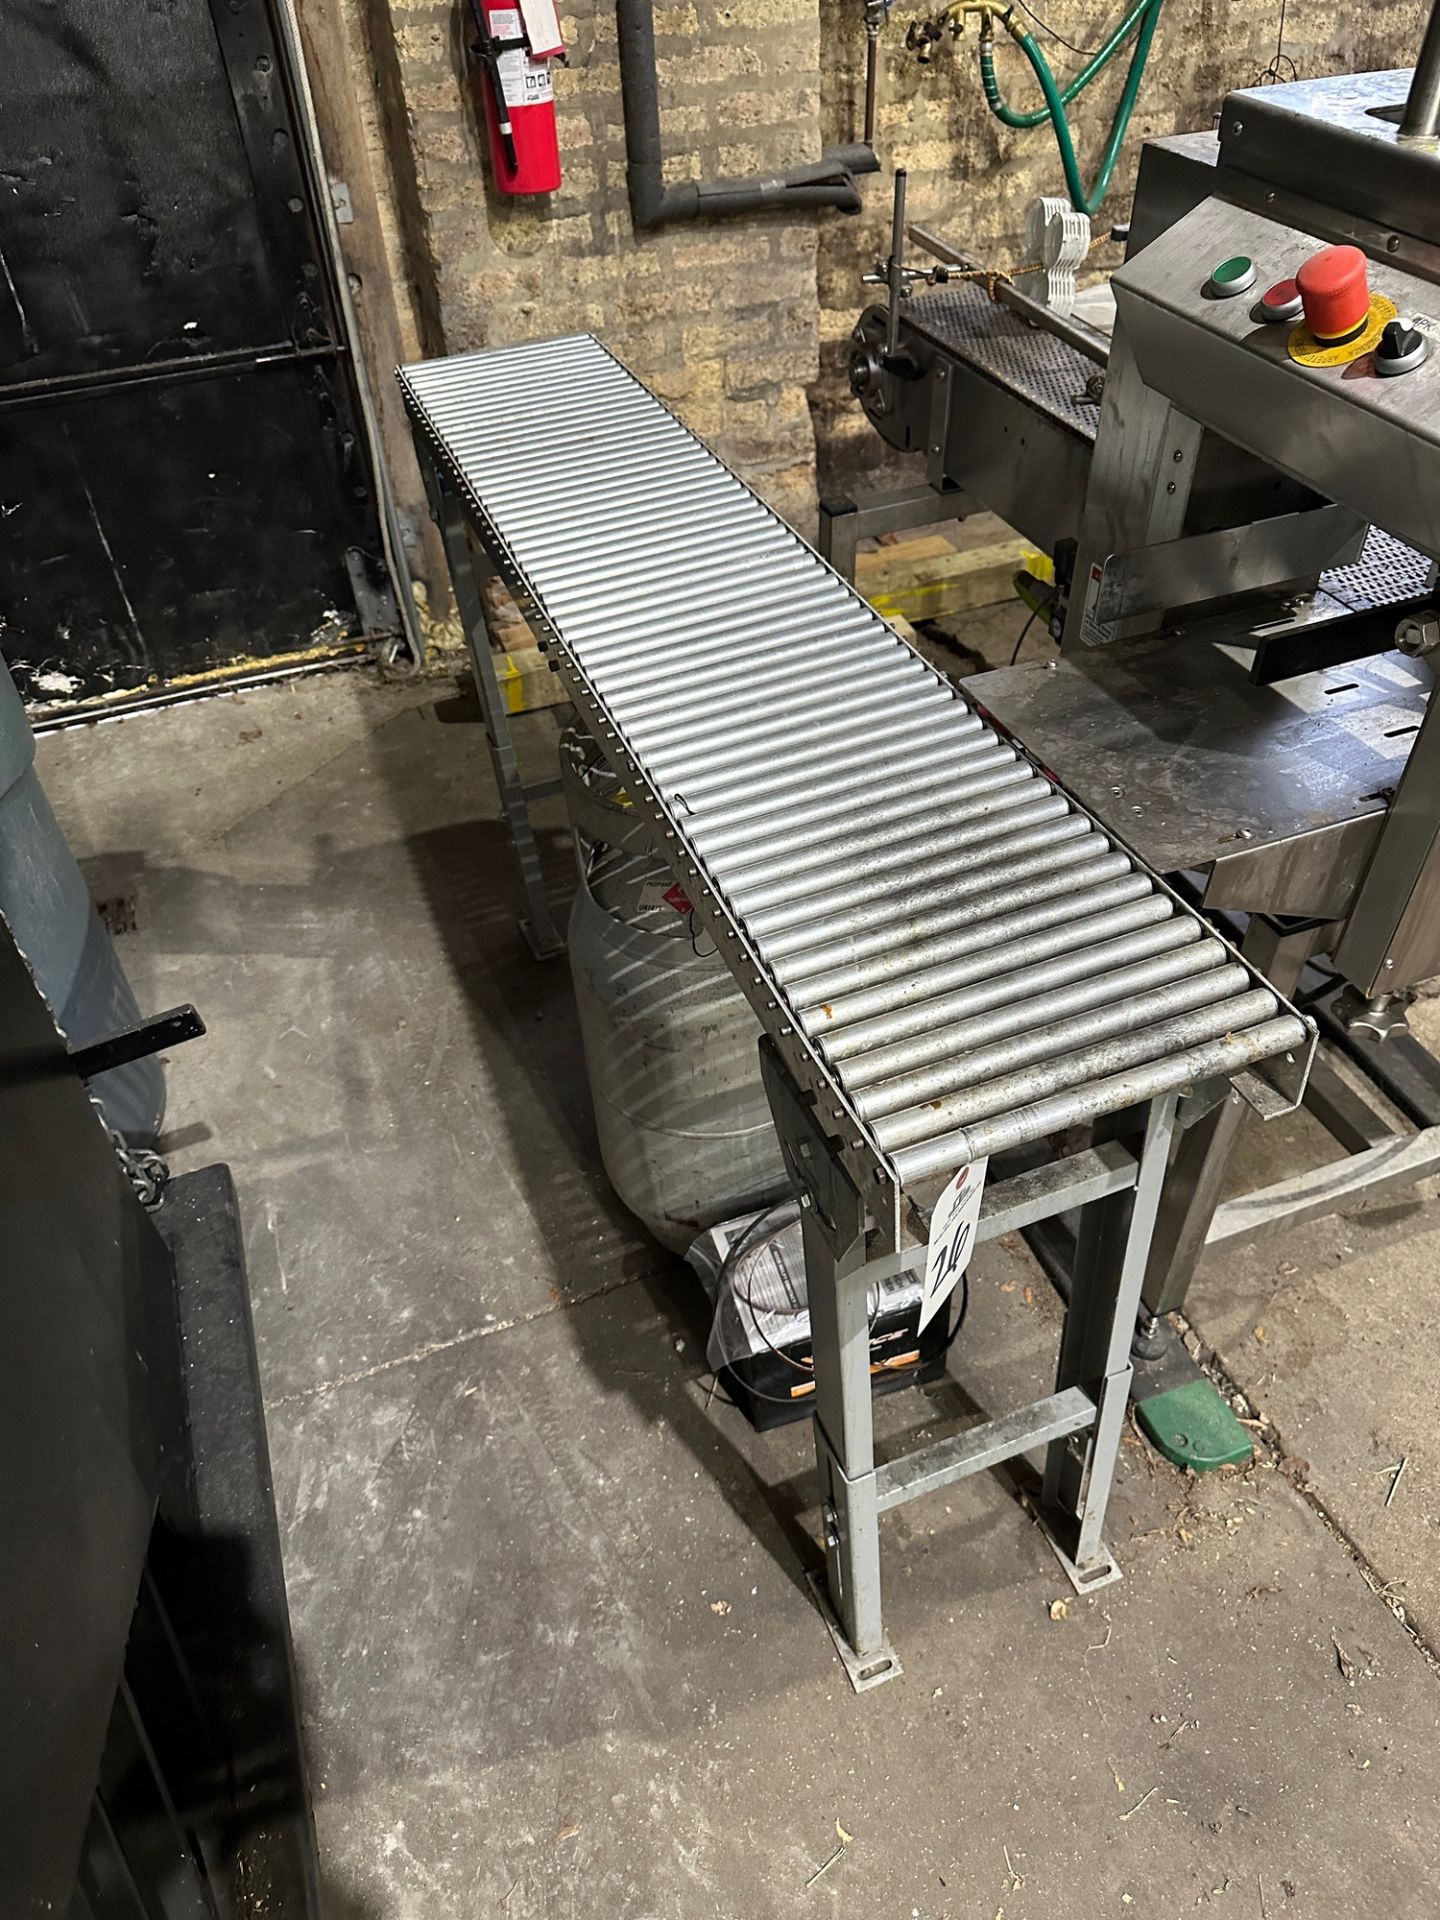 Stainless Steel Roller Conveyor (Approx. 10.5" x 5') | Rig Fee $75